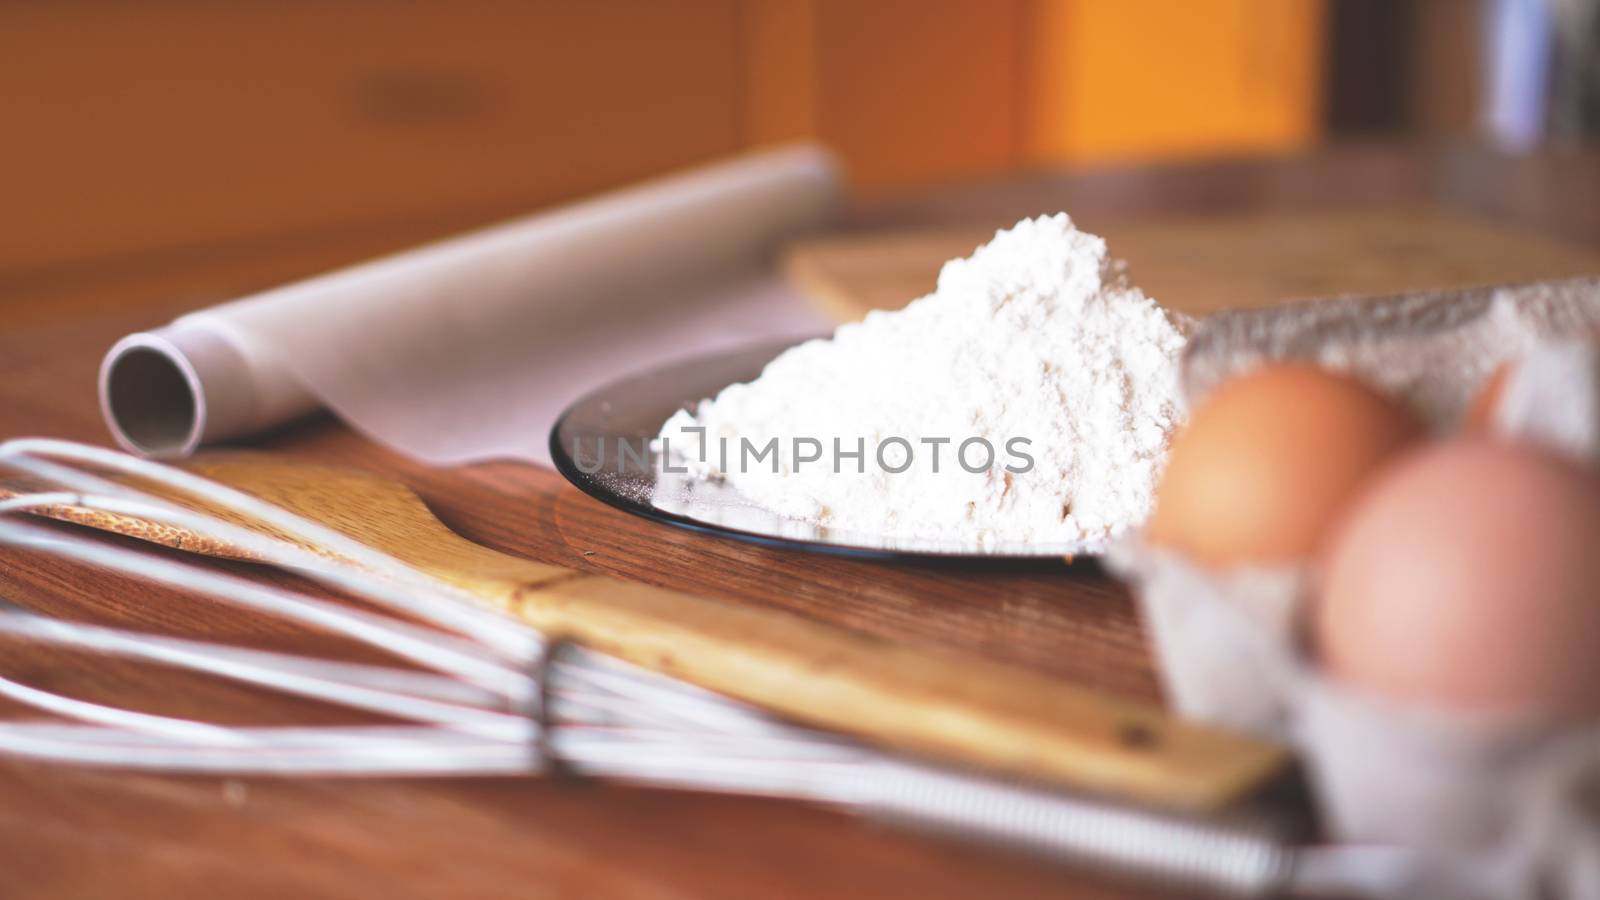 Ingredients for baking homemade bread. Eggs, flour. Wooden background, side view by natali_brill